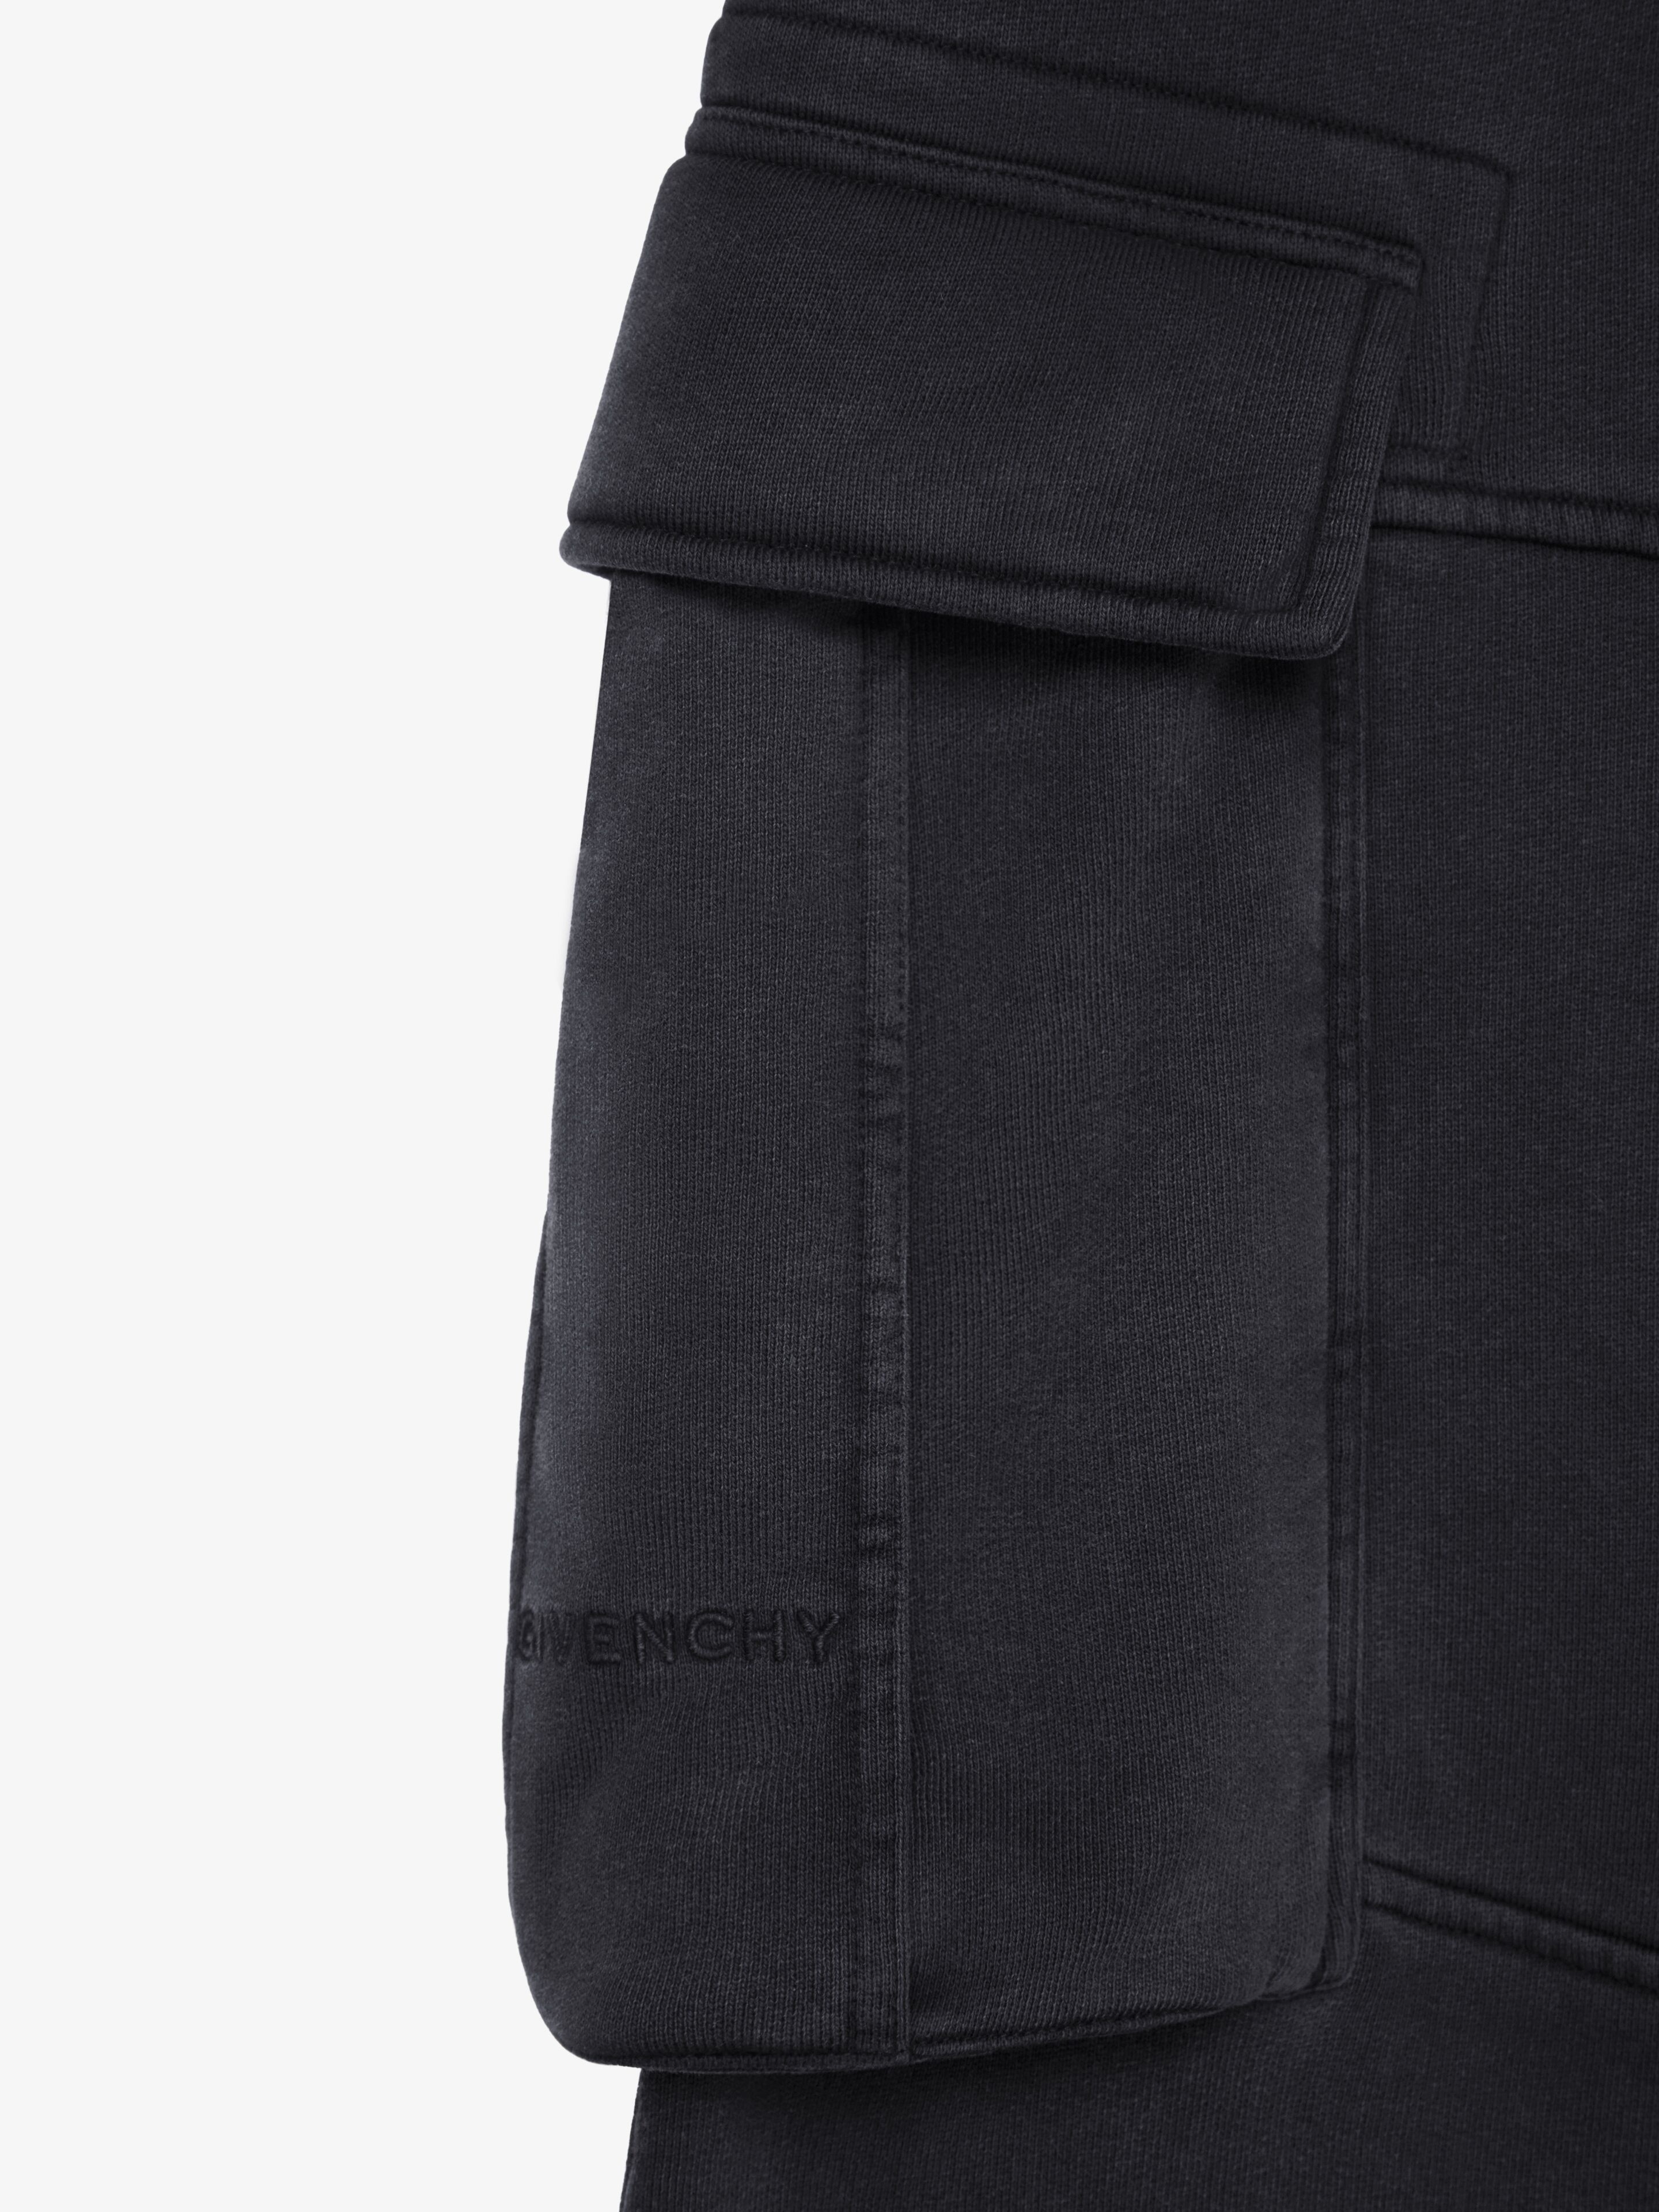 CARGO PANTS IN COTTON JERSEY